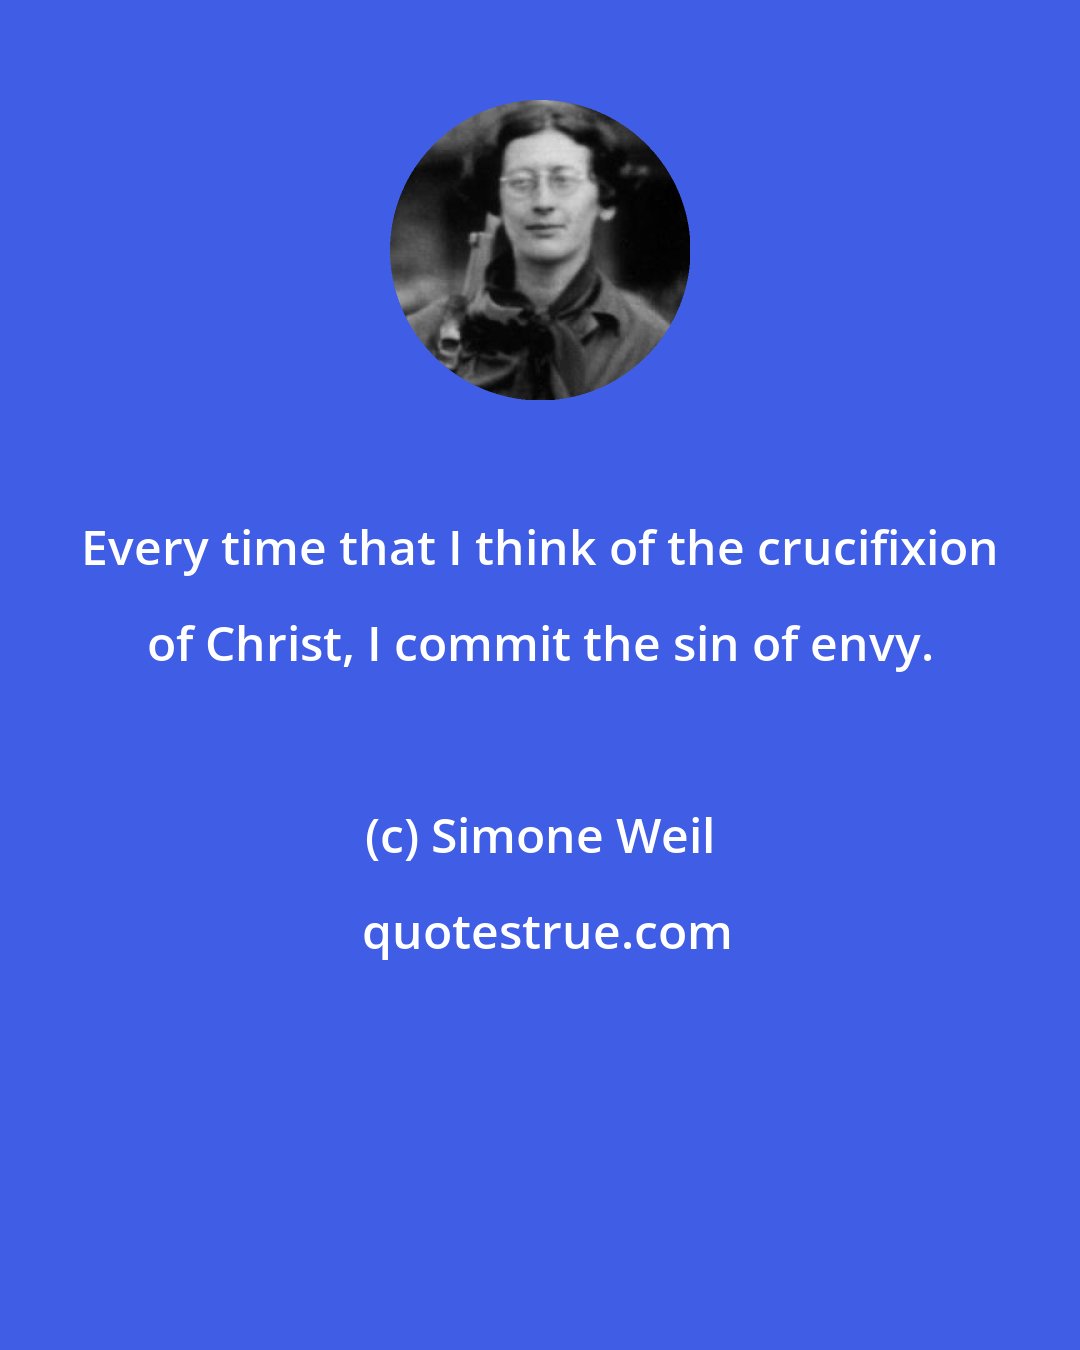 Simone Weil: Every time that I think of the crucifixion of Christ, I commit the sin of envy.